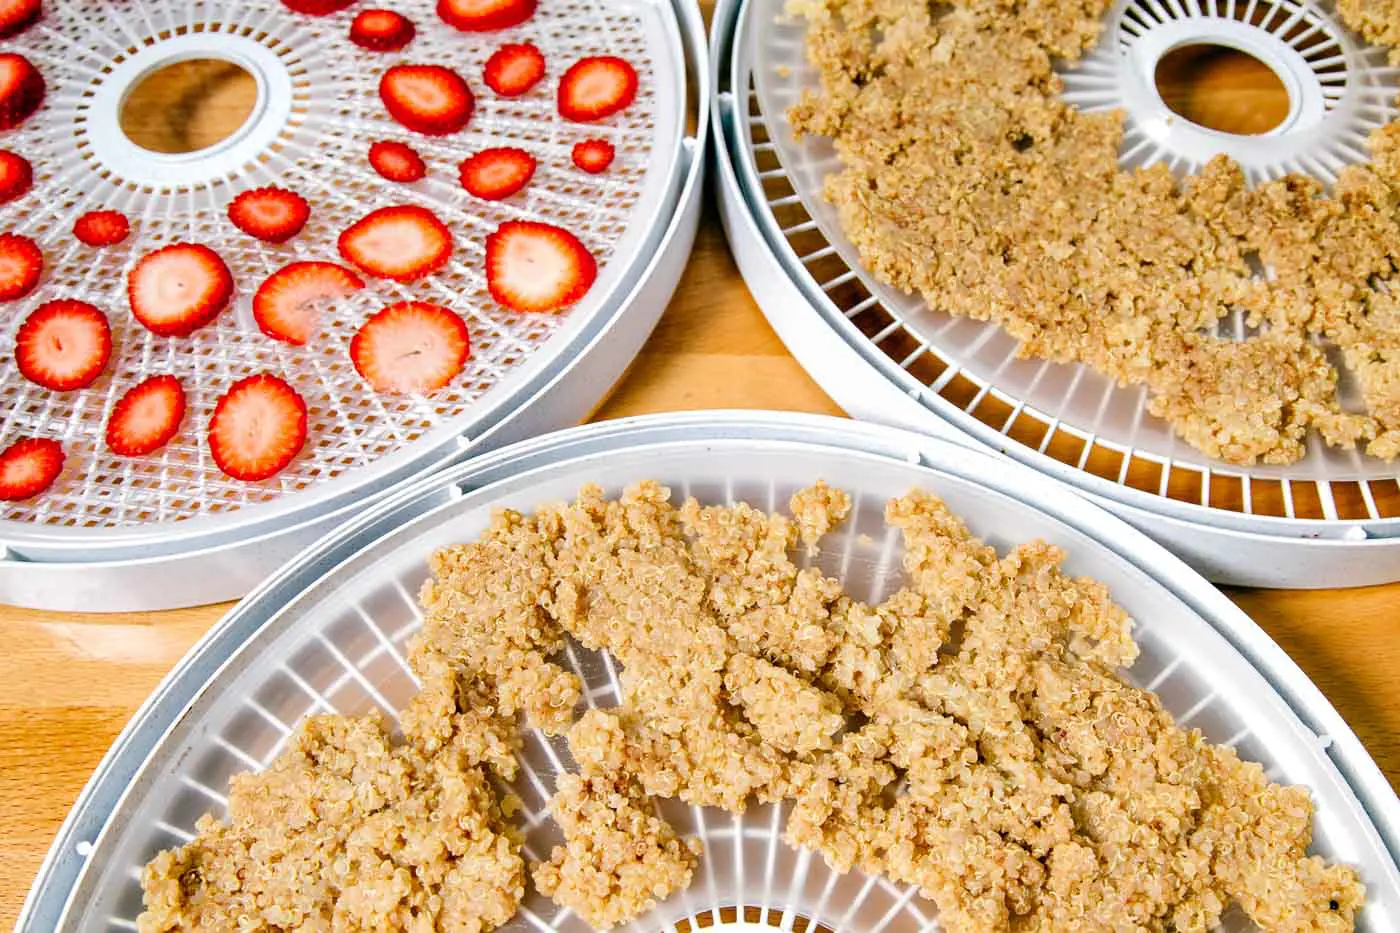 Cooked quinoa and sliced strawberries on dehydrator trays